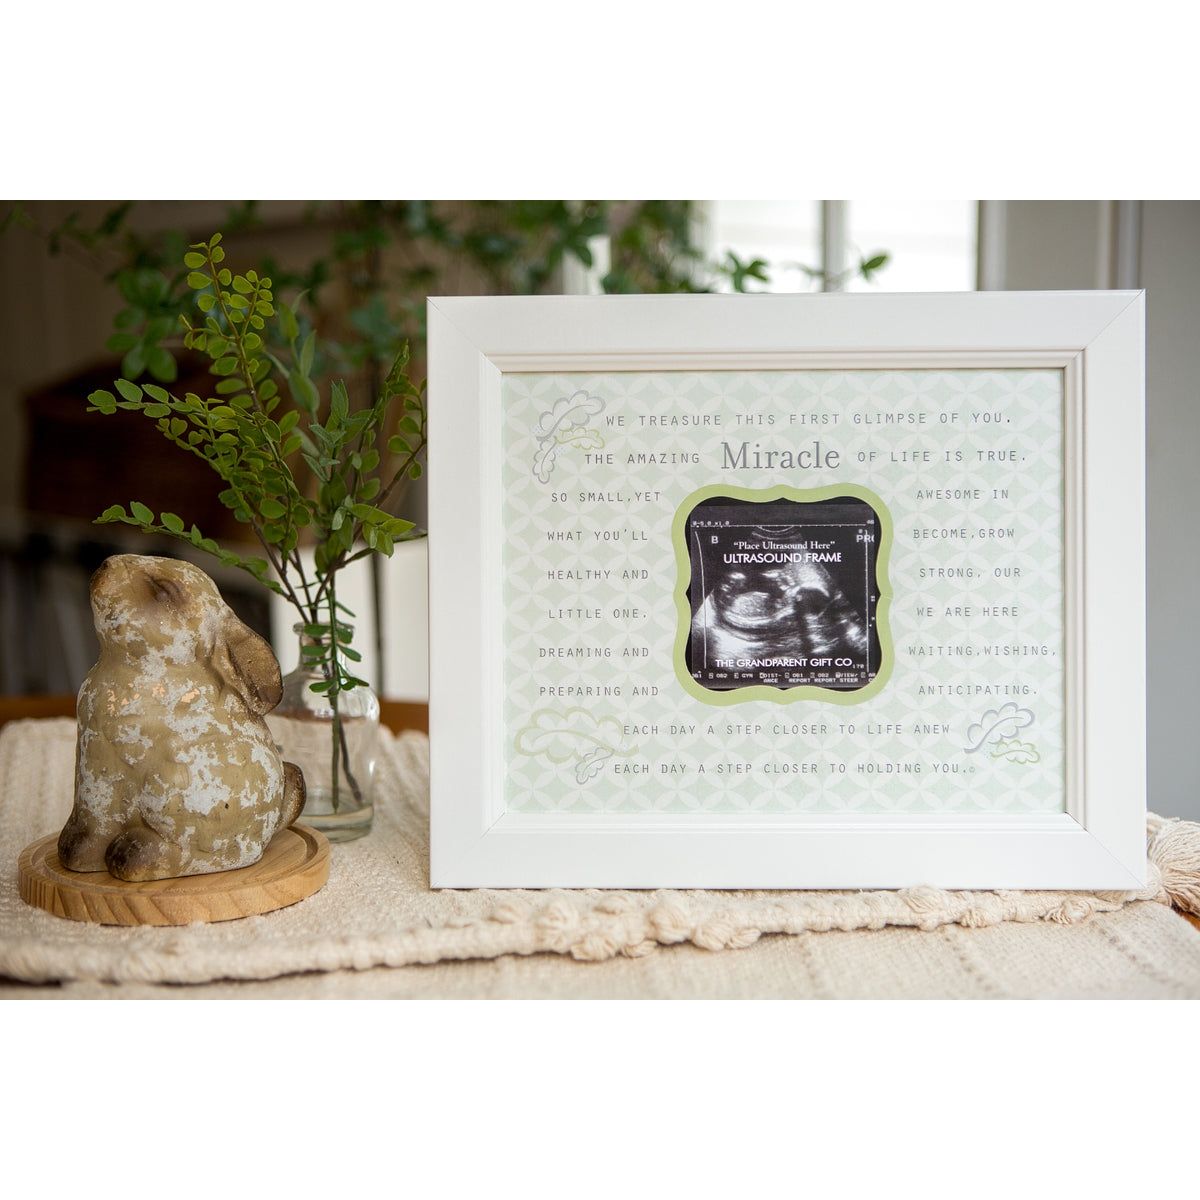 Miracle Ultrasound Frame: Home Decor